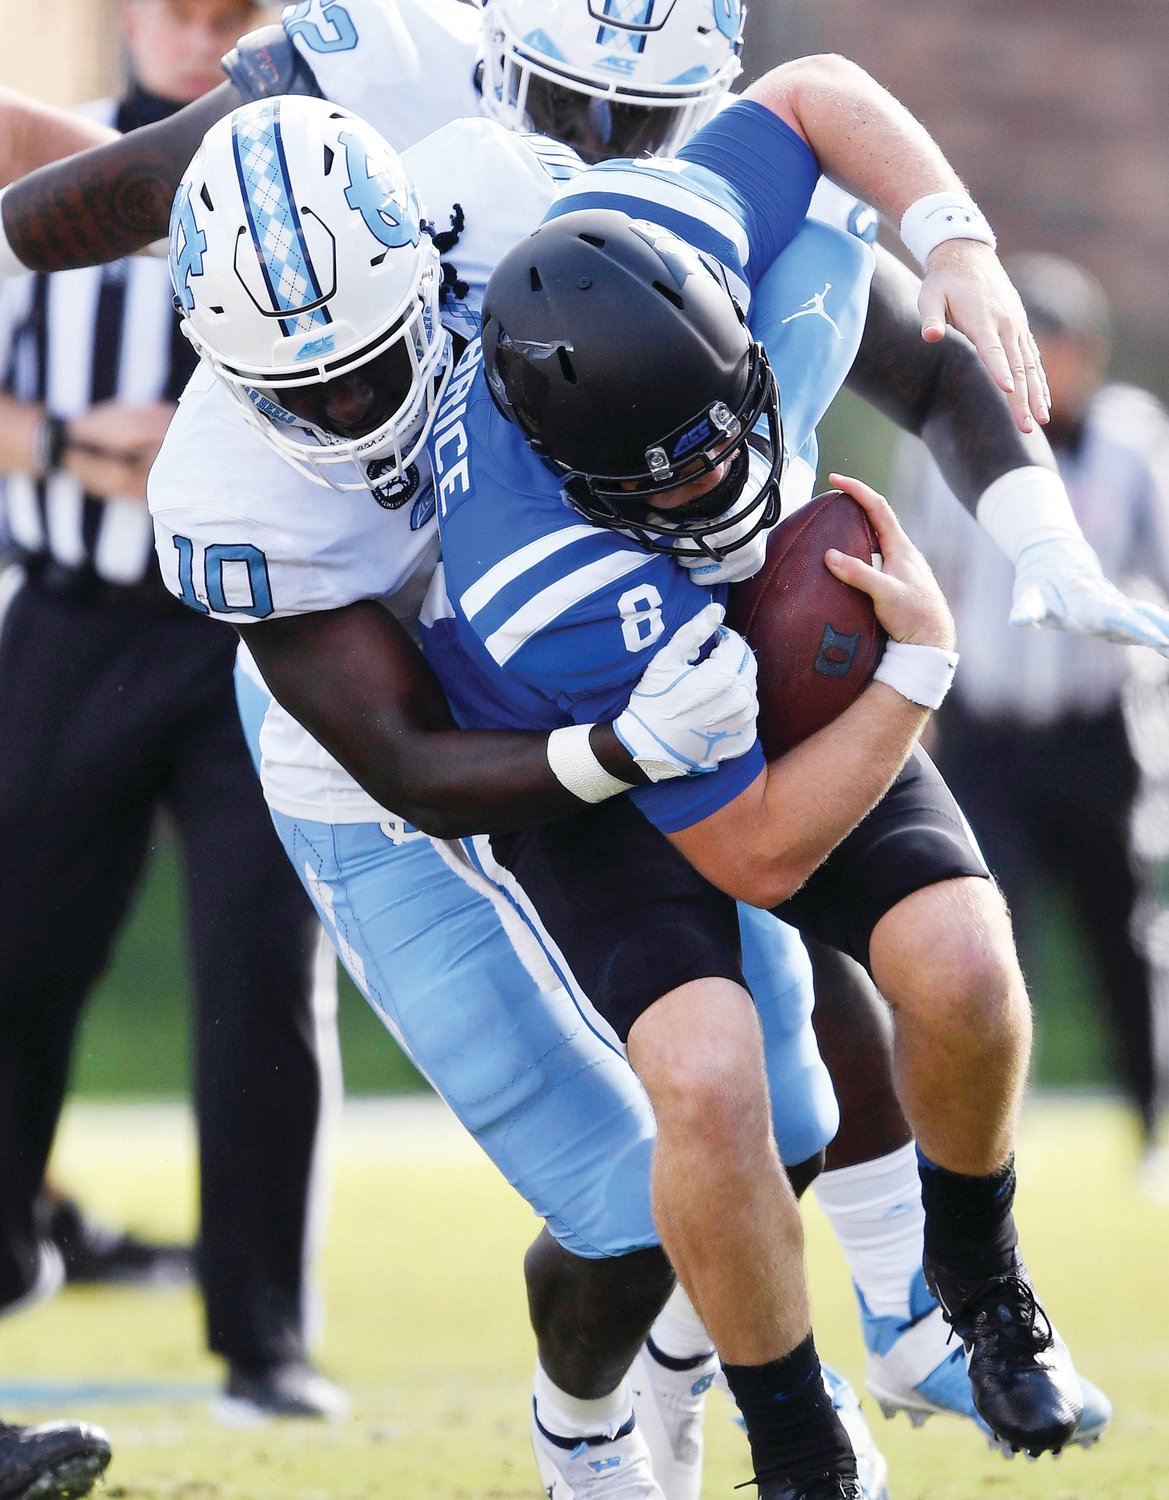 North Carolina linebacker Desmond Evans (10) brings down Duke quarterback Chase Brice (8) in a game against the Blue Devils at Wallace Wade Stadium in Durham on Nov. 7, 2020.